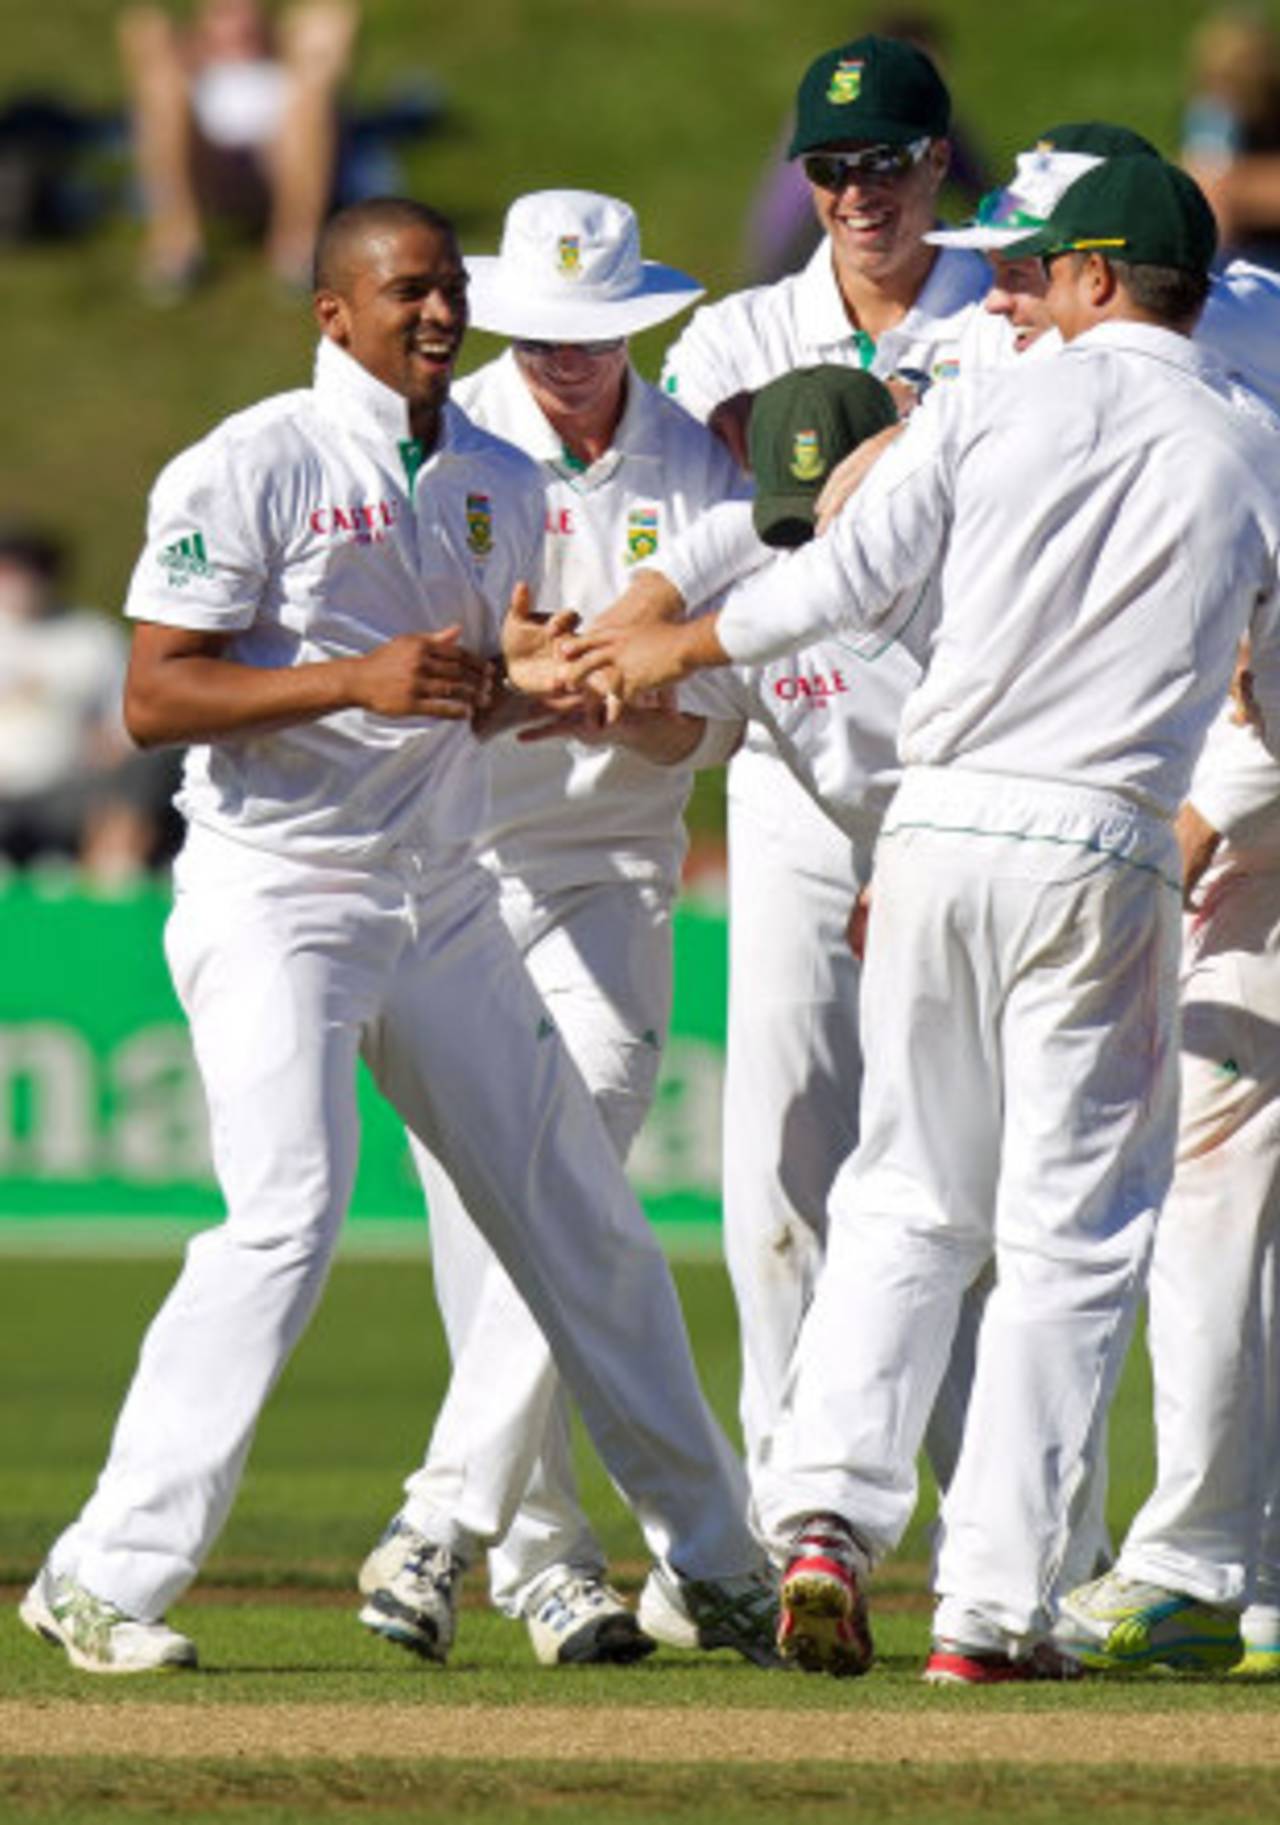 South Africa get together after one of Vernon Philander's wickets, New Zealand v South Africa, 3rd Test, Wellington, 4th day, March 26, 2012